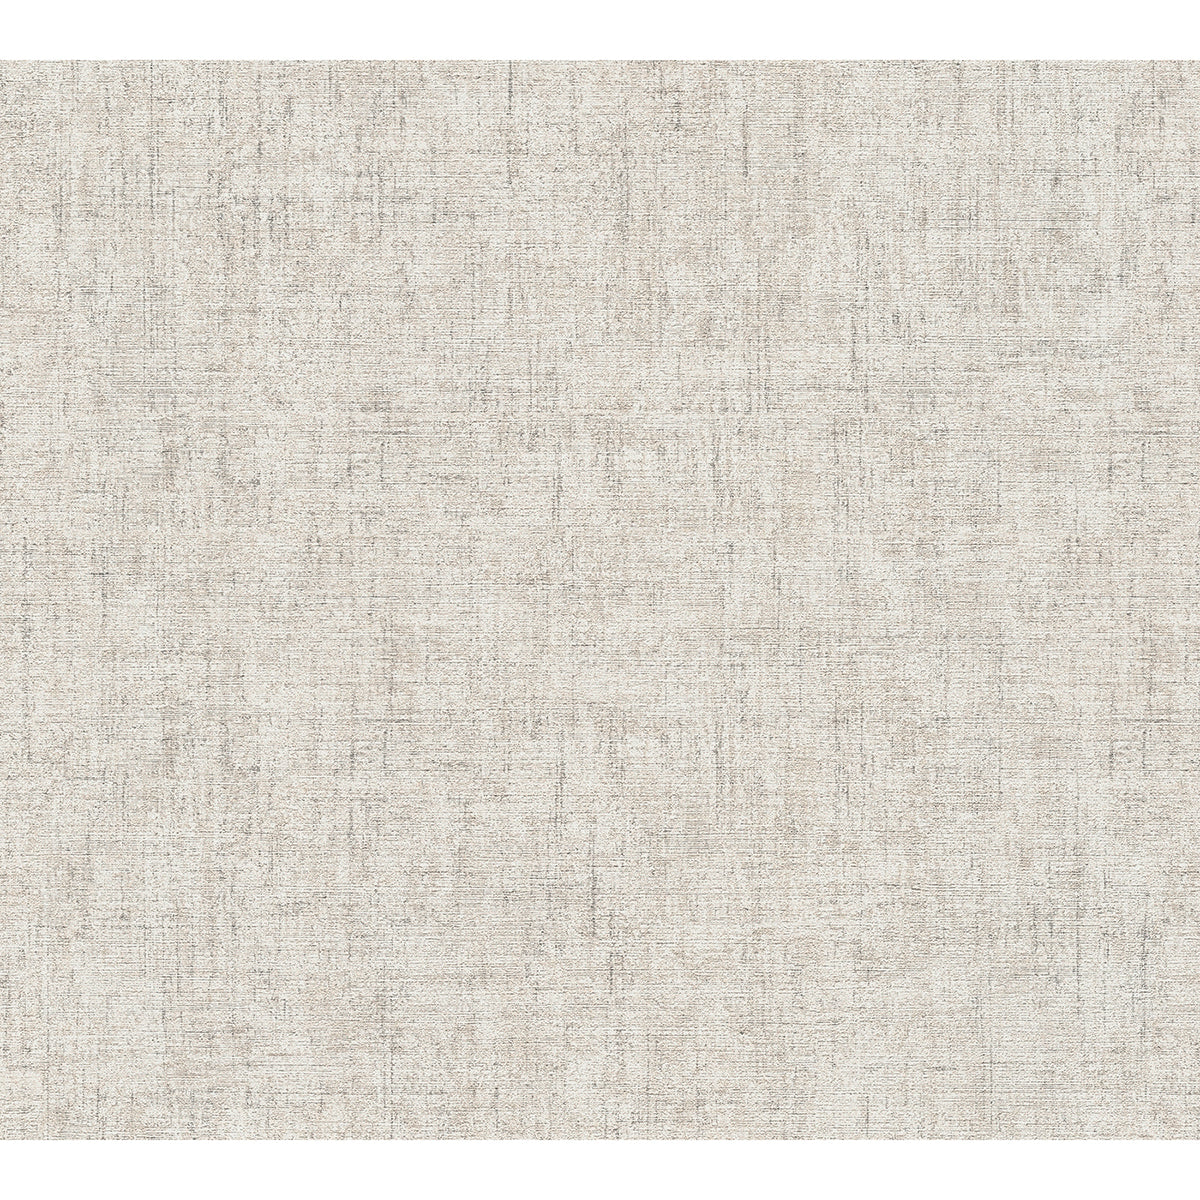 Picture of Yurimi Grey Distressed Wallpaper